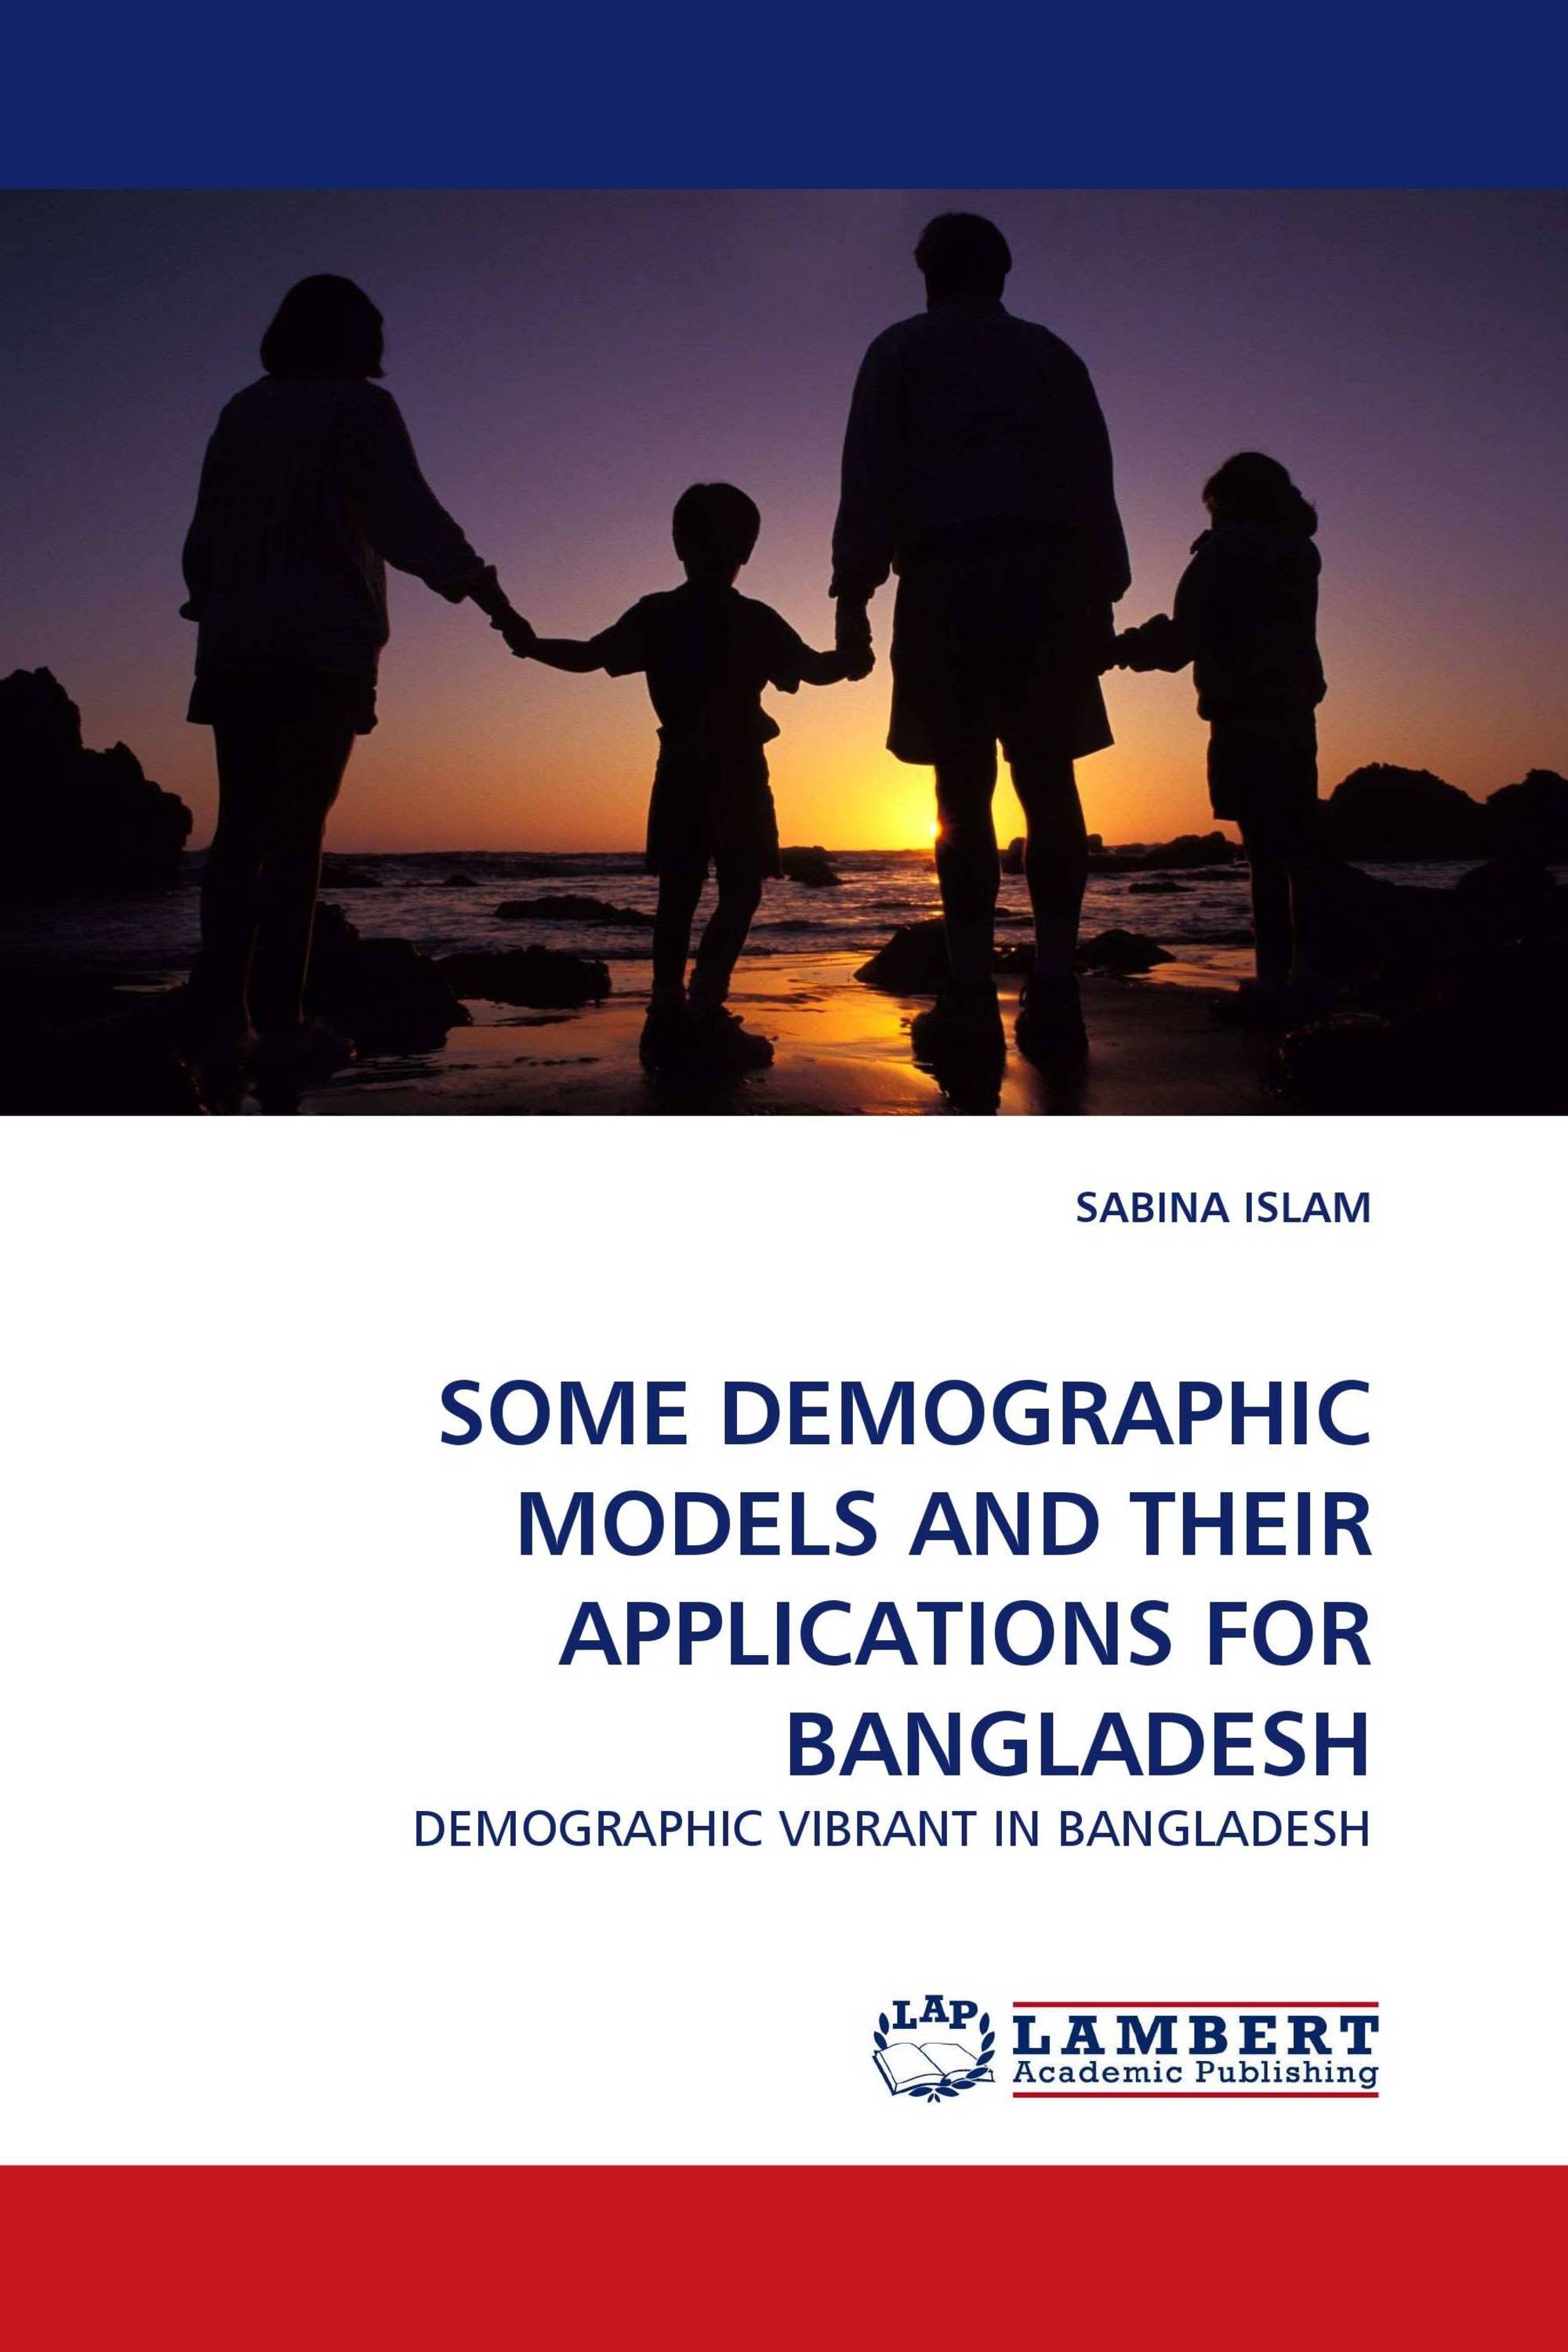 SOME DEMOGRAPHIC MODELS AND THEIR APPLICATIONS FOR BANGLADESH